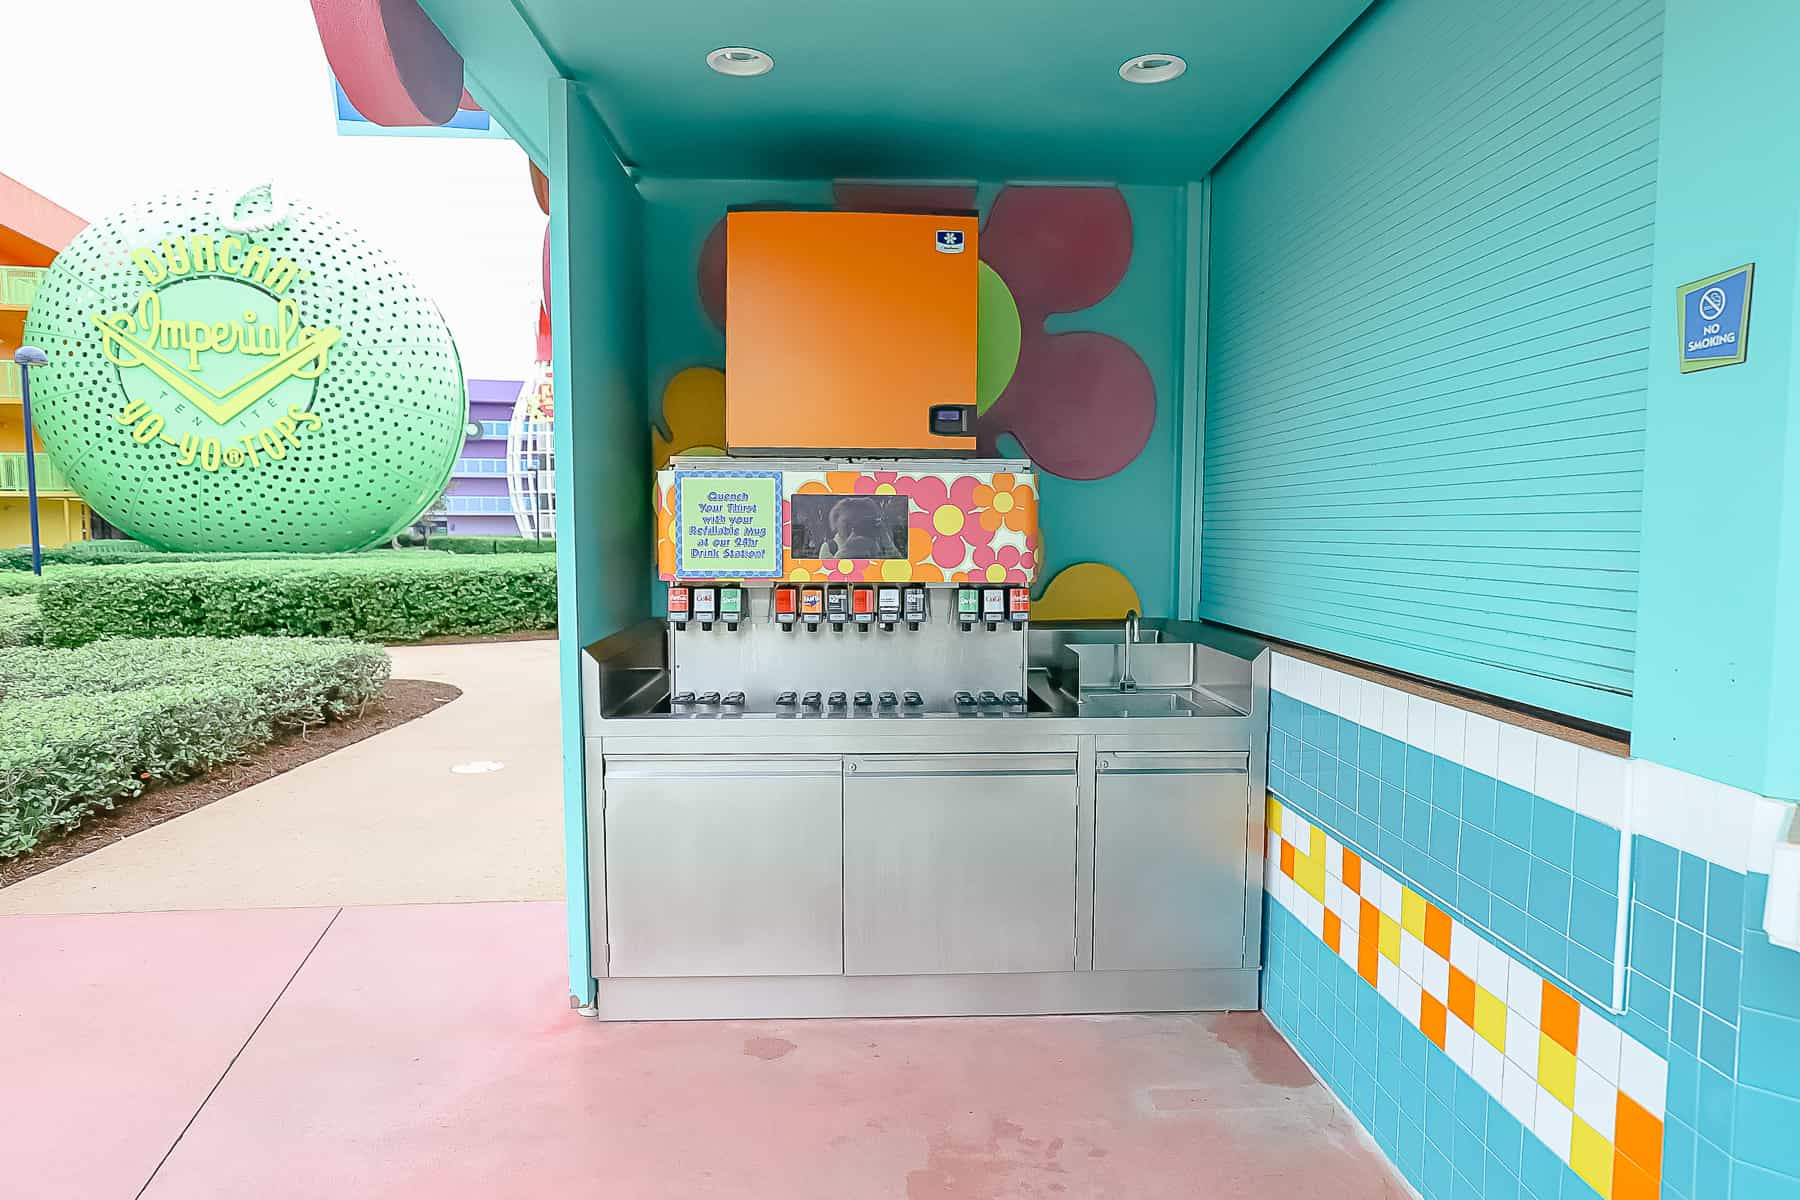 beverage refill station near the feature pool at Pop Century 